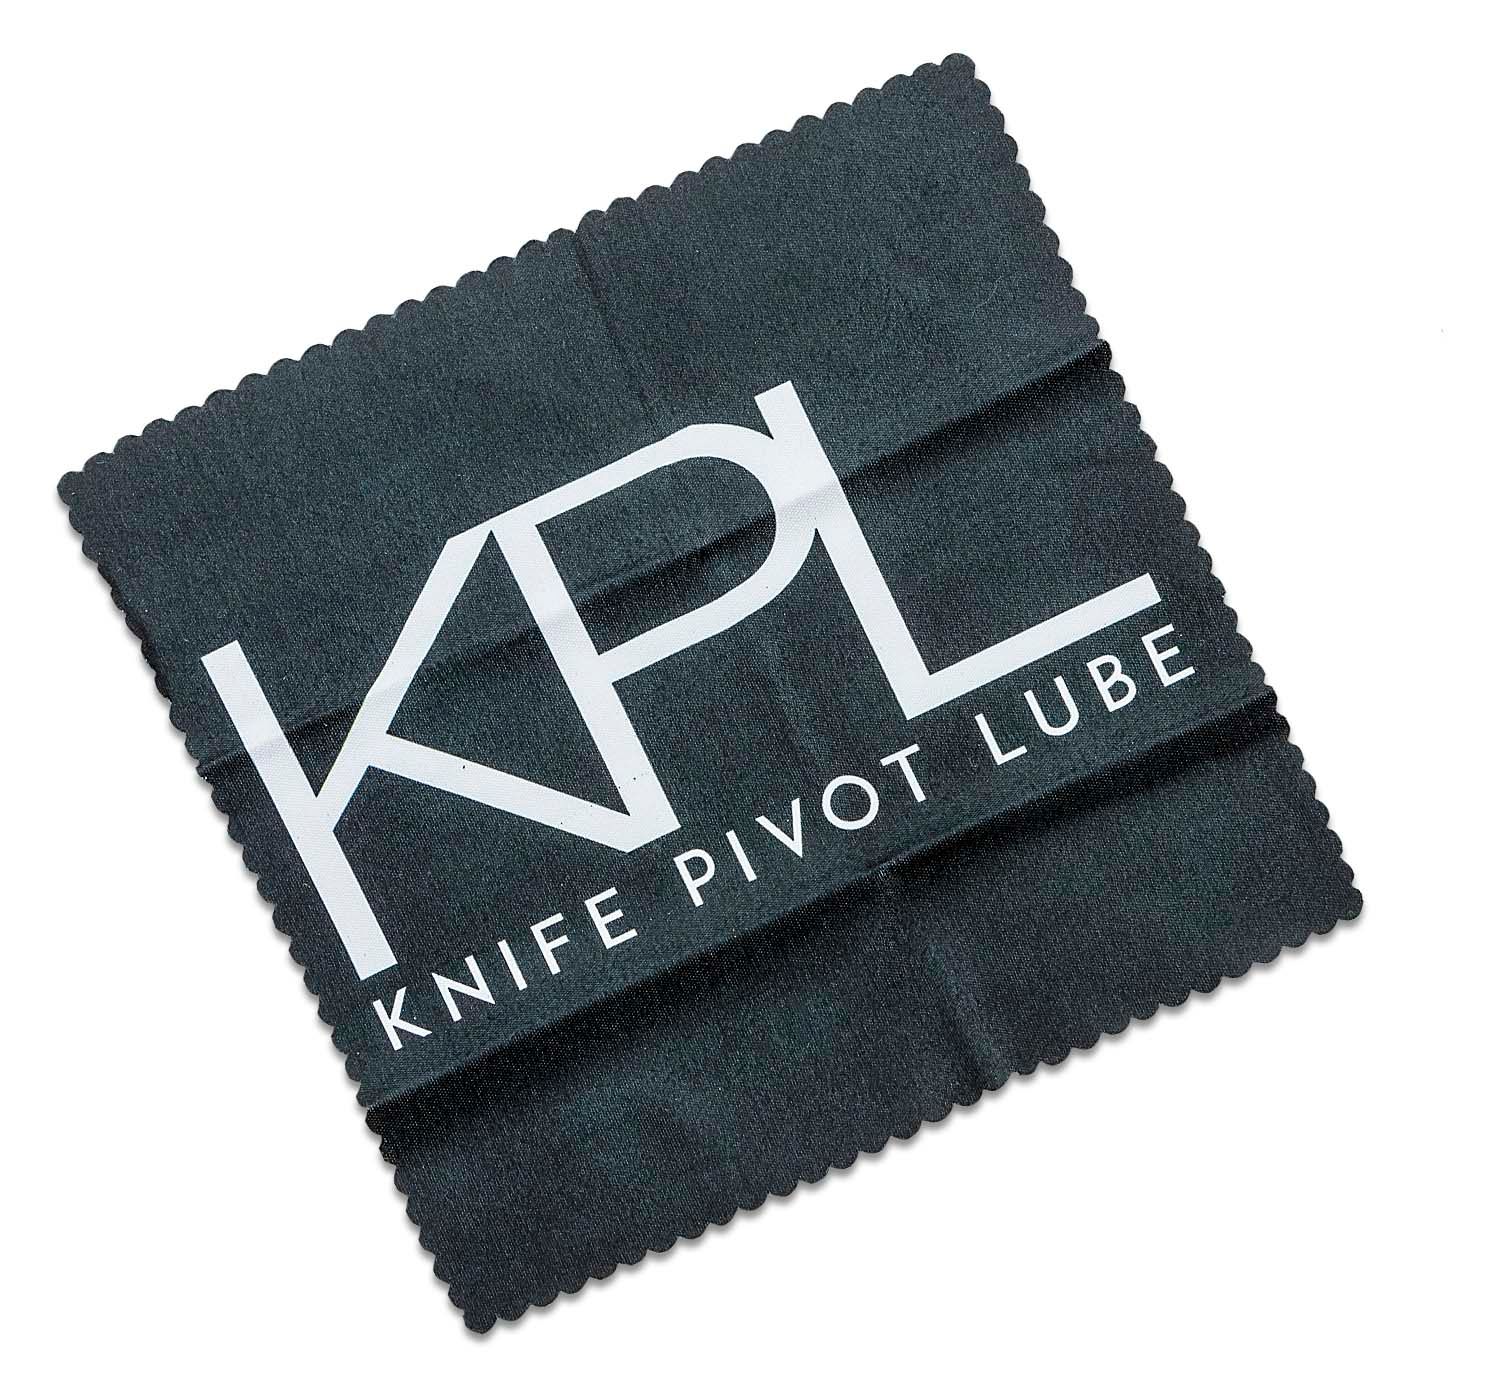 What to Keep in a Knife Maintenance Tool Kit – Knife Pivot Lube